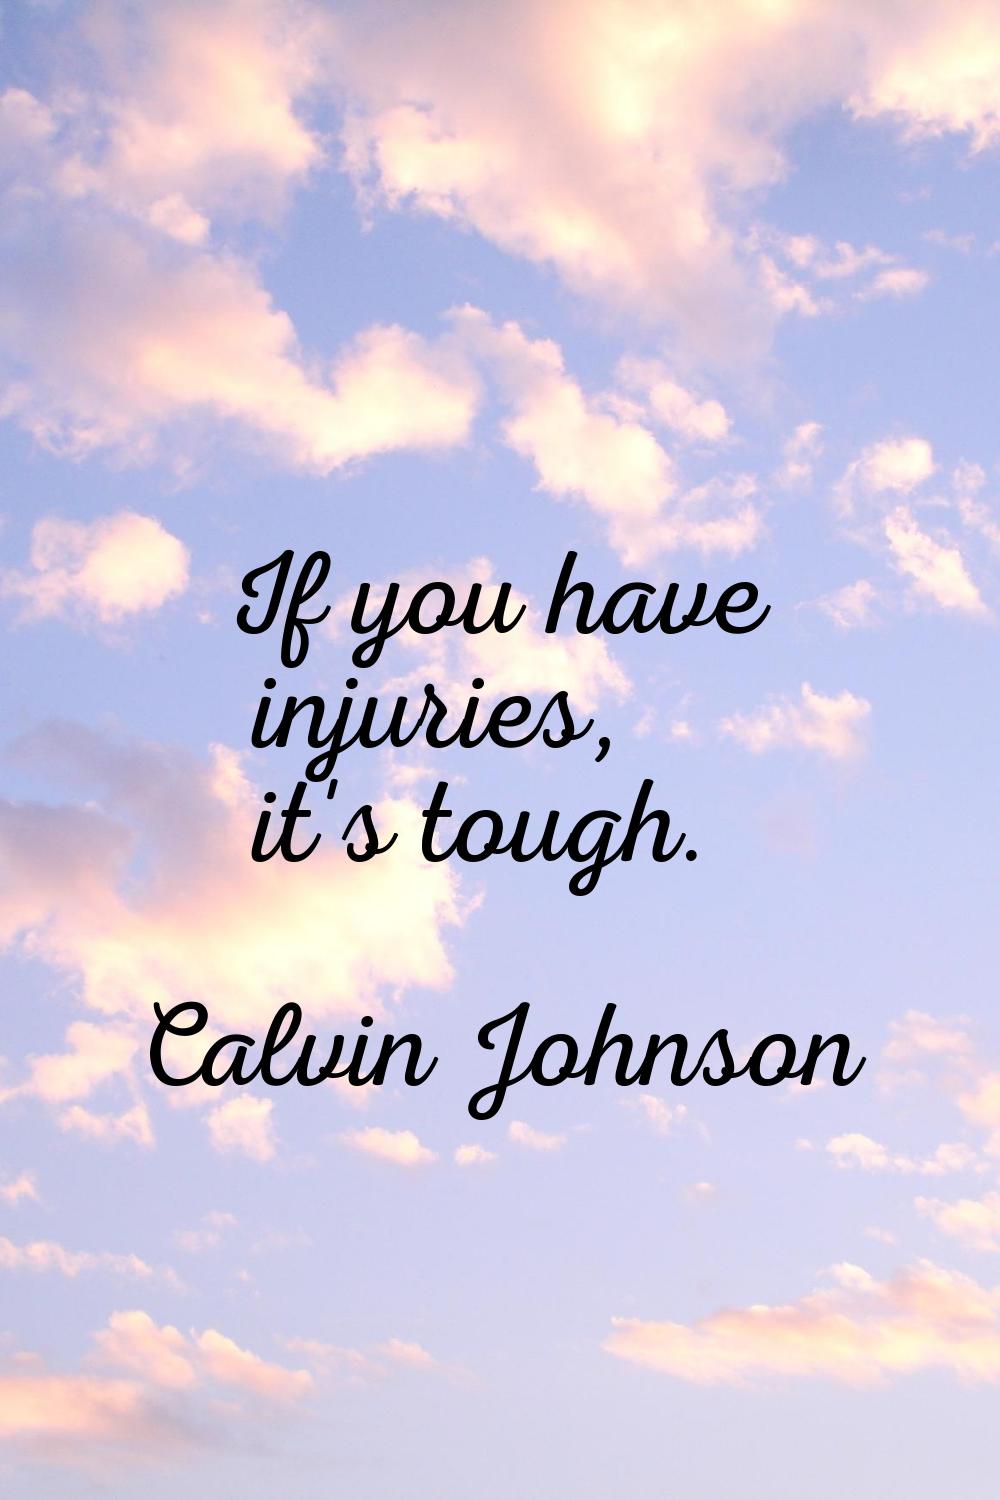 If you have injuries, it's tough.